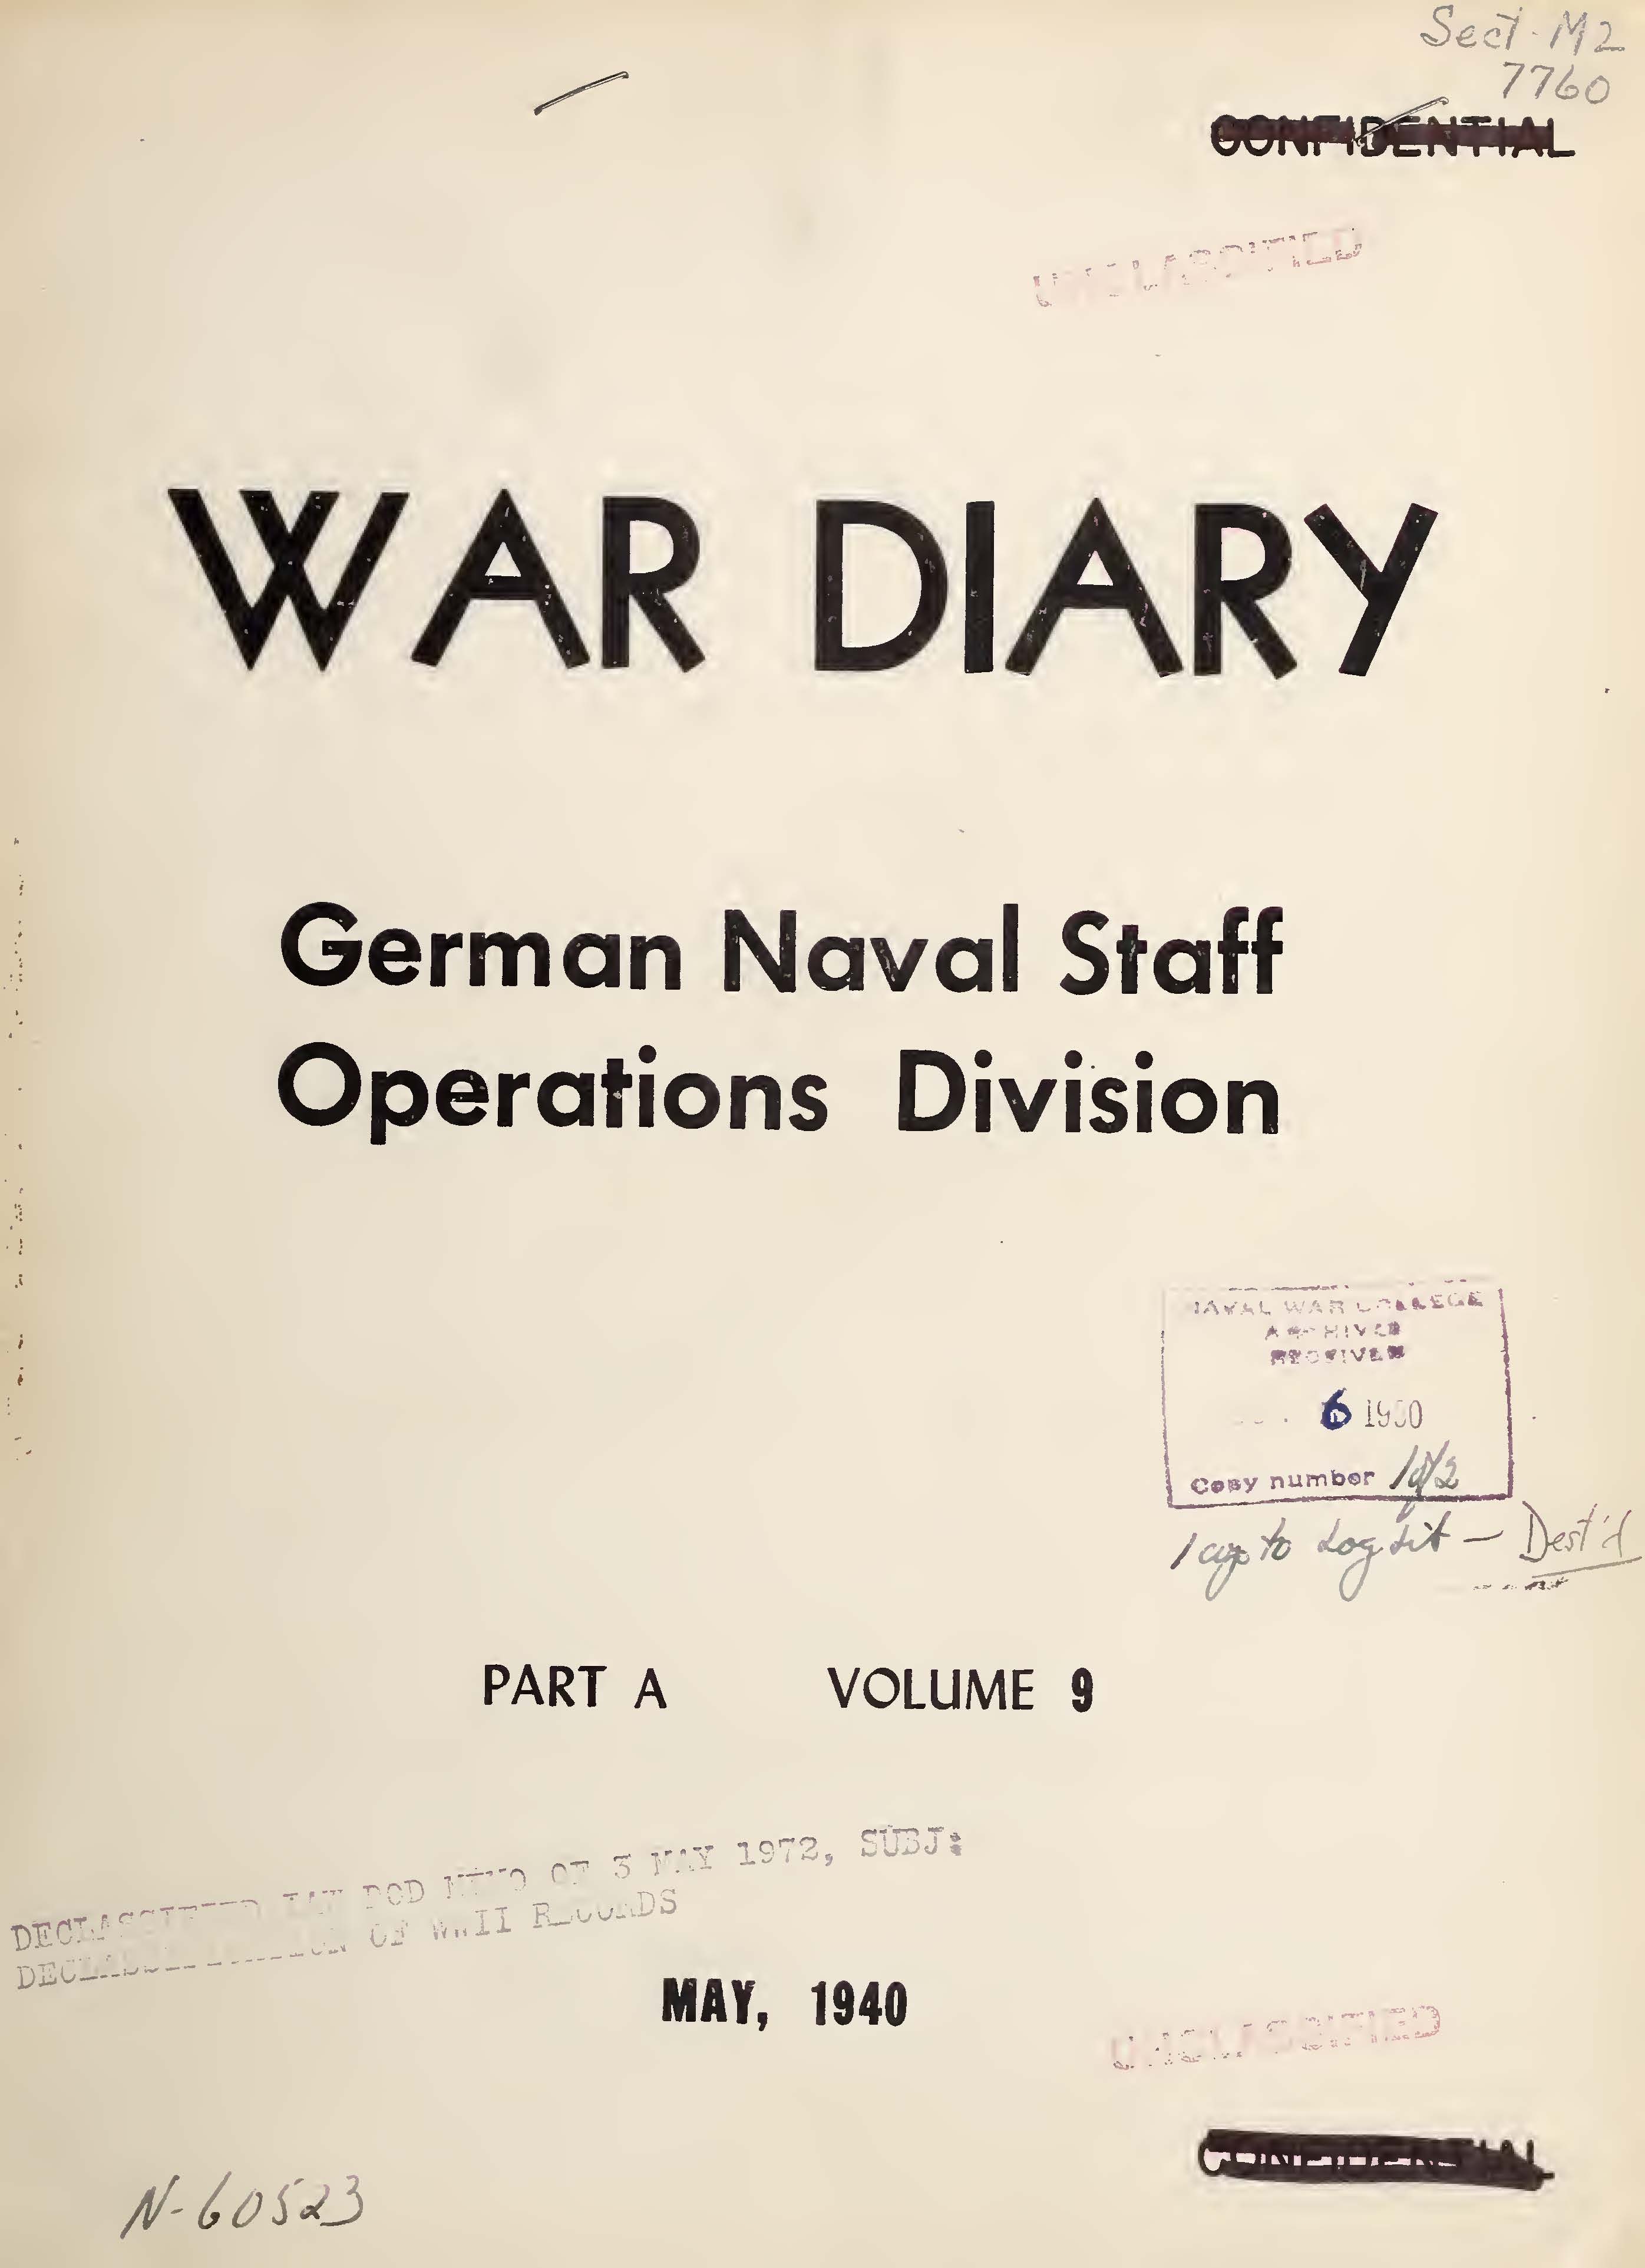 War Diary of German Naval Staff (Operations Division) Part A, Volume 9, May 1940